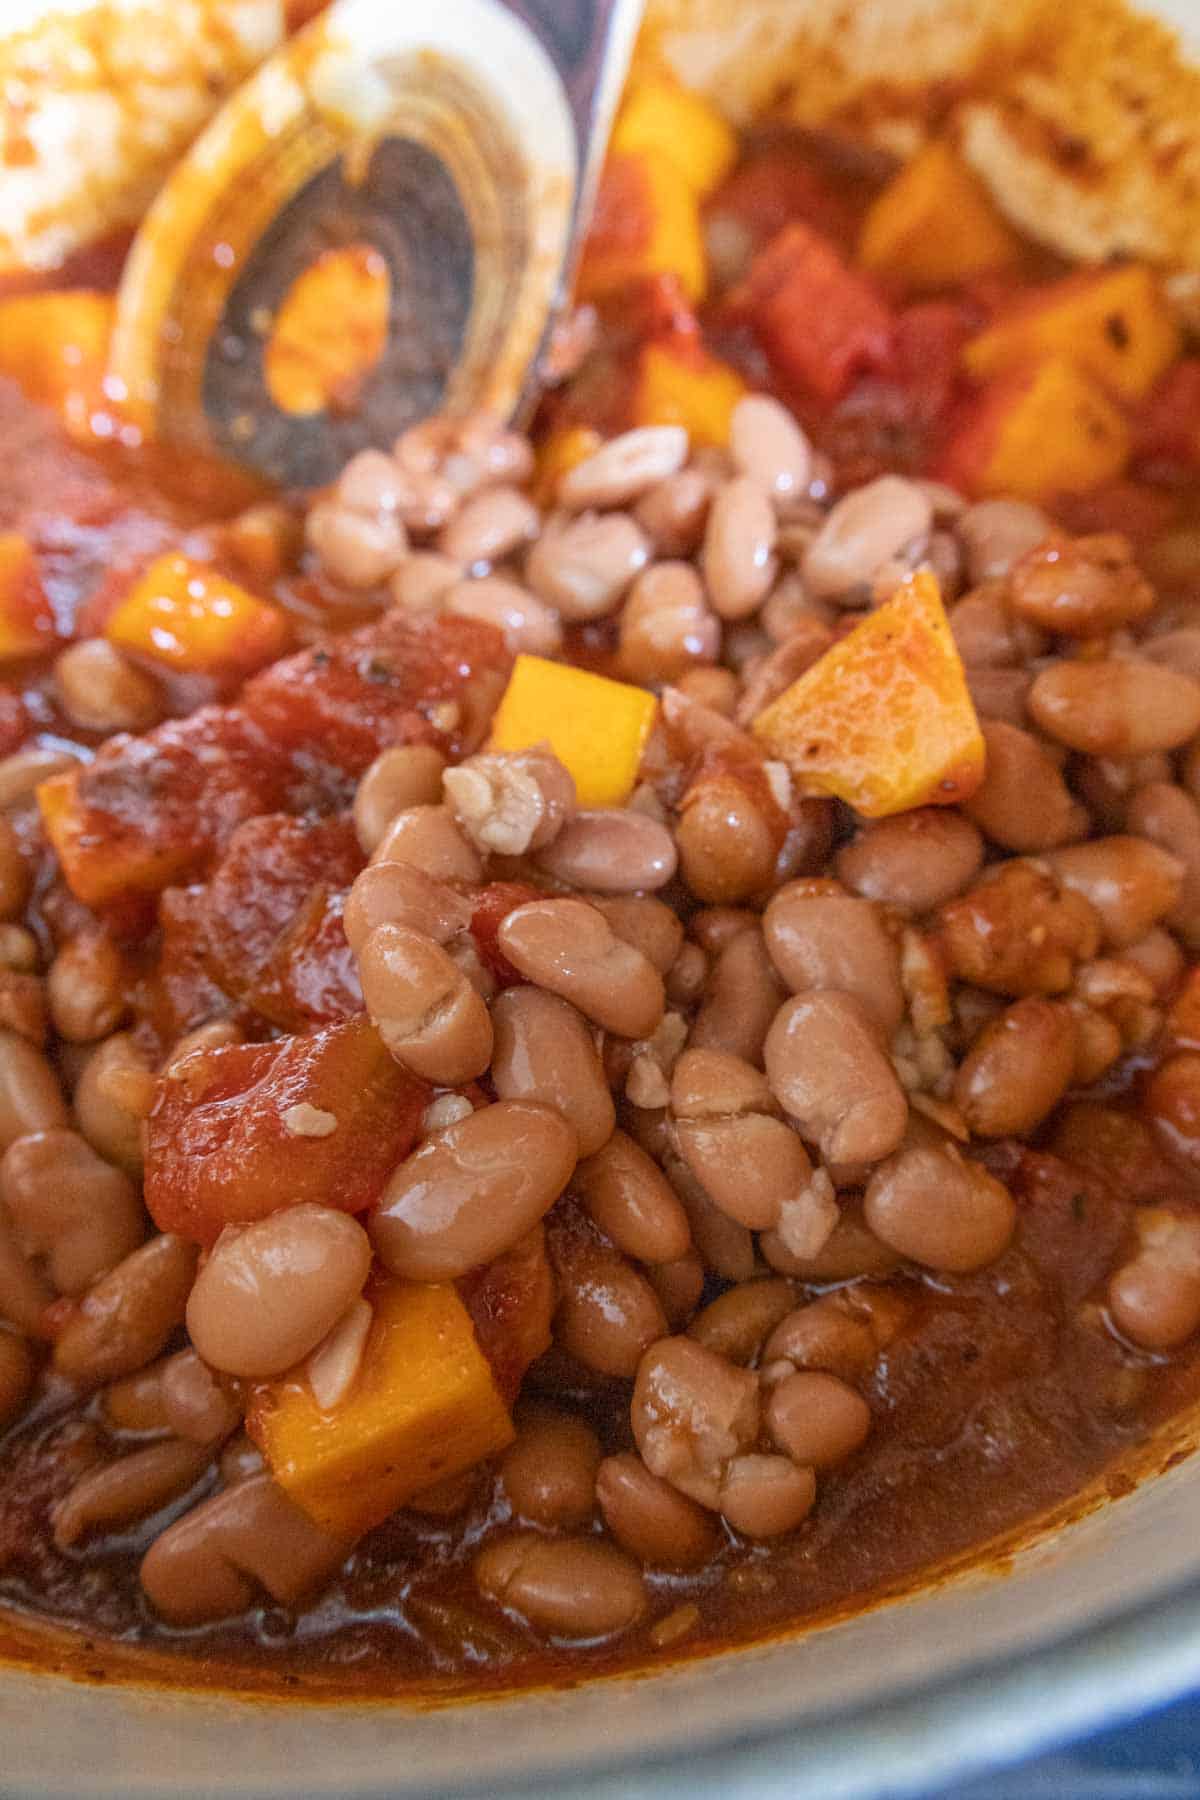 Beans being added to chili.